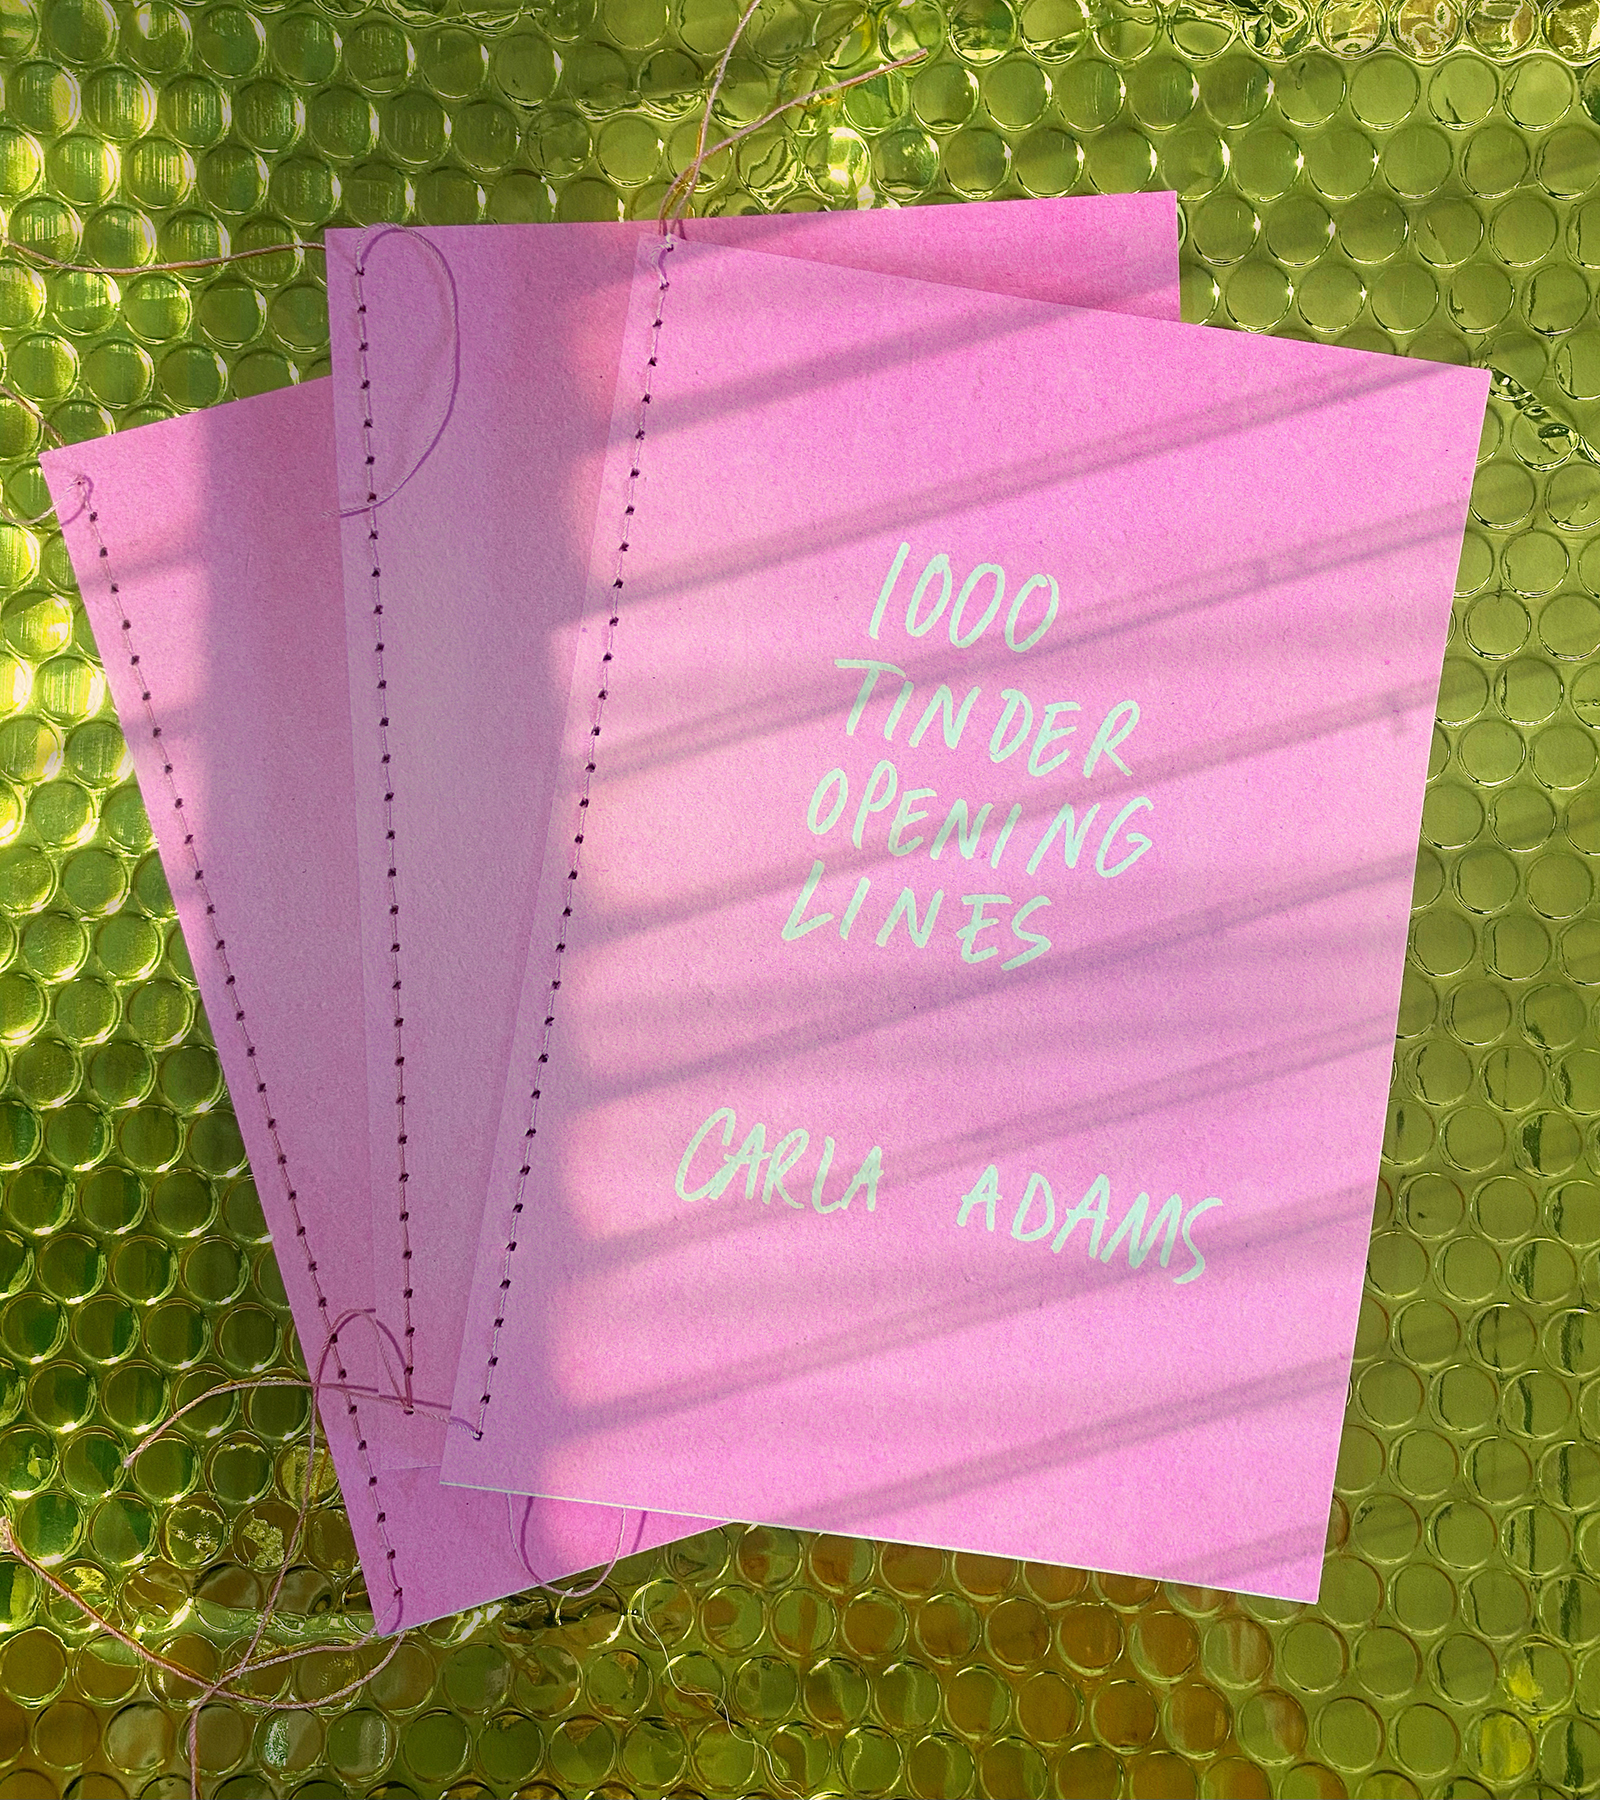 Three pink hand-sewn books titled '1000 Tinder Opening Lines, Carla Adams' on a green background